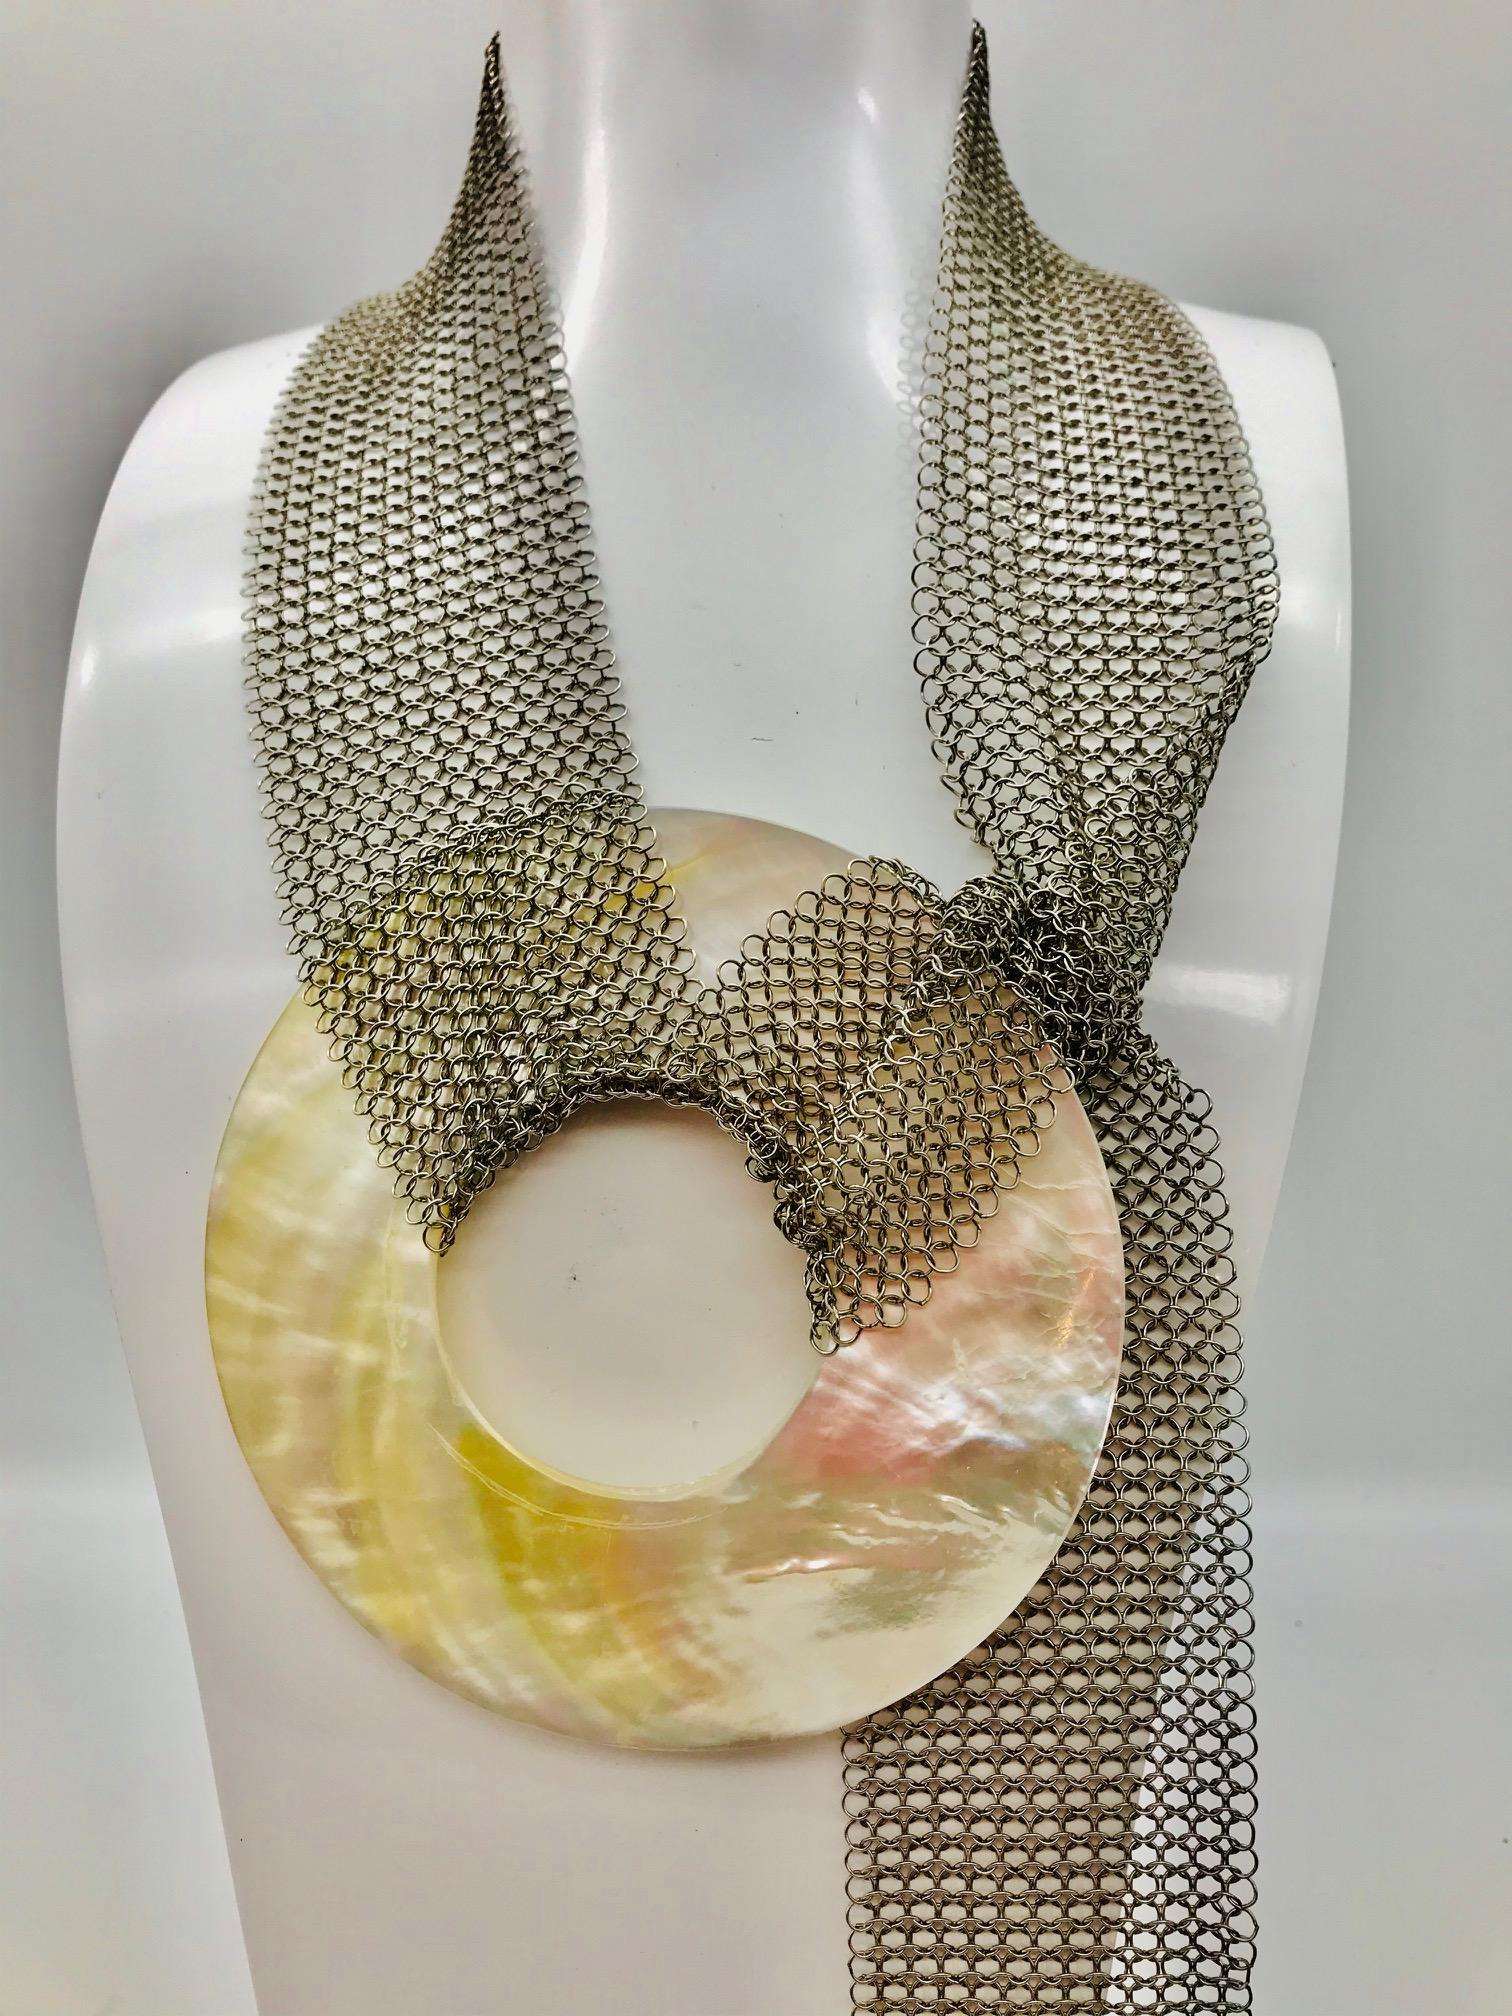 White mother of Pearl (Nacre) Belt / Necklace/ Earrings on Stainless Steel Mesh. This piece of jewelry can be worn as a Belt or Necklace.  The matching French Deco up cycled Earrings create an elegant  and very versatile set. White Nacre(MOP) is the